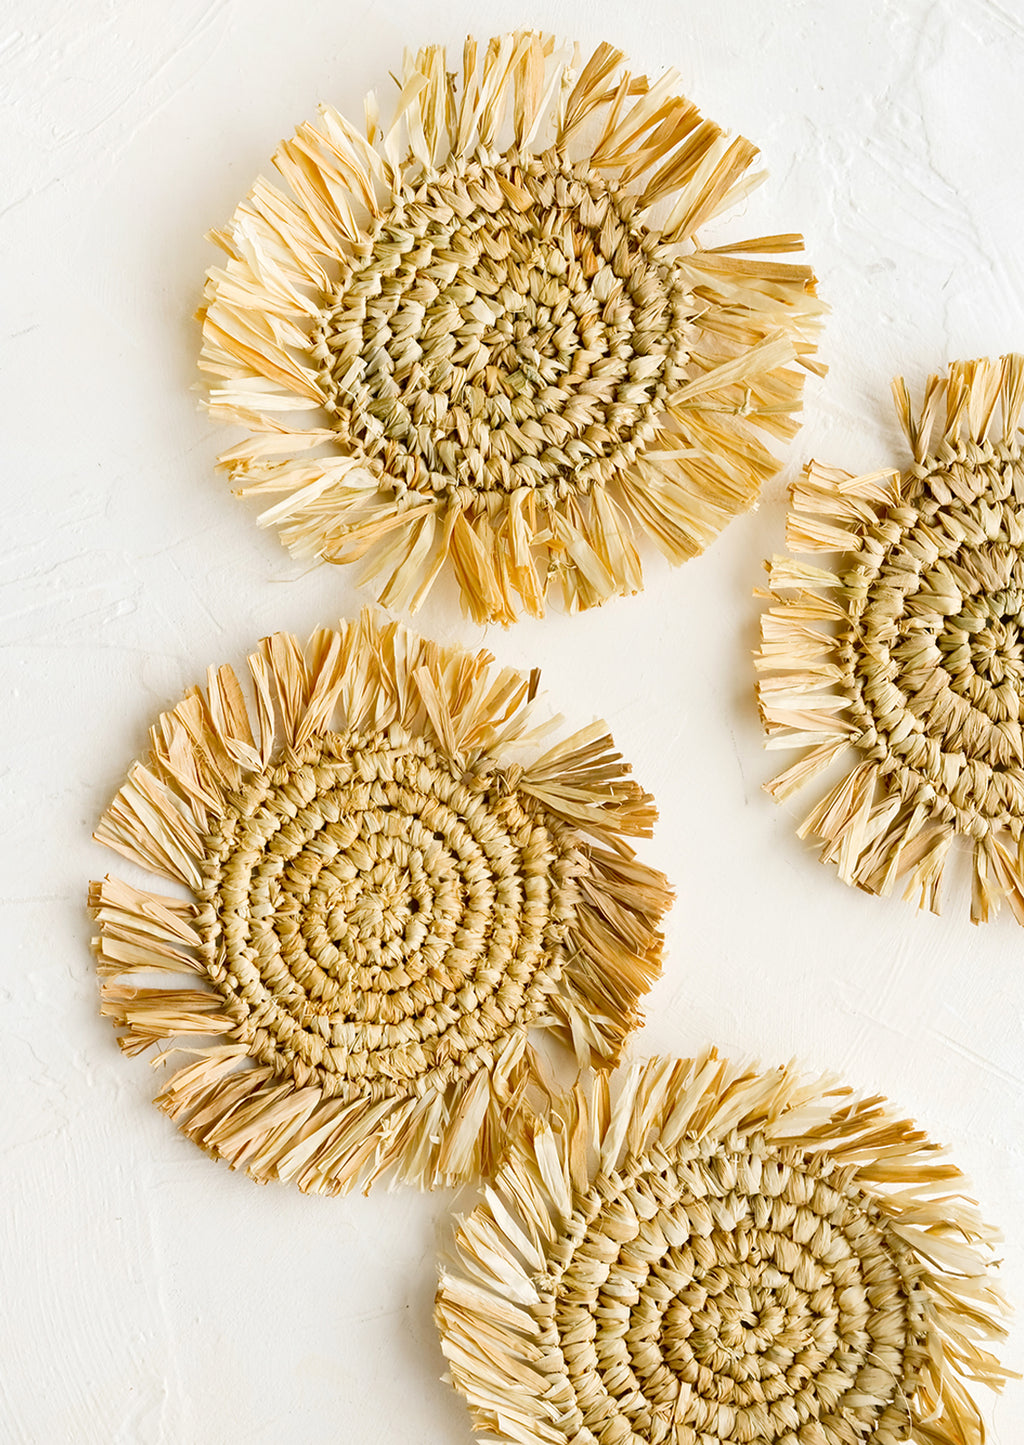 Tan: Four round straw coasters with fringed trim in natural tan.